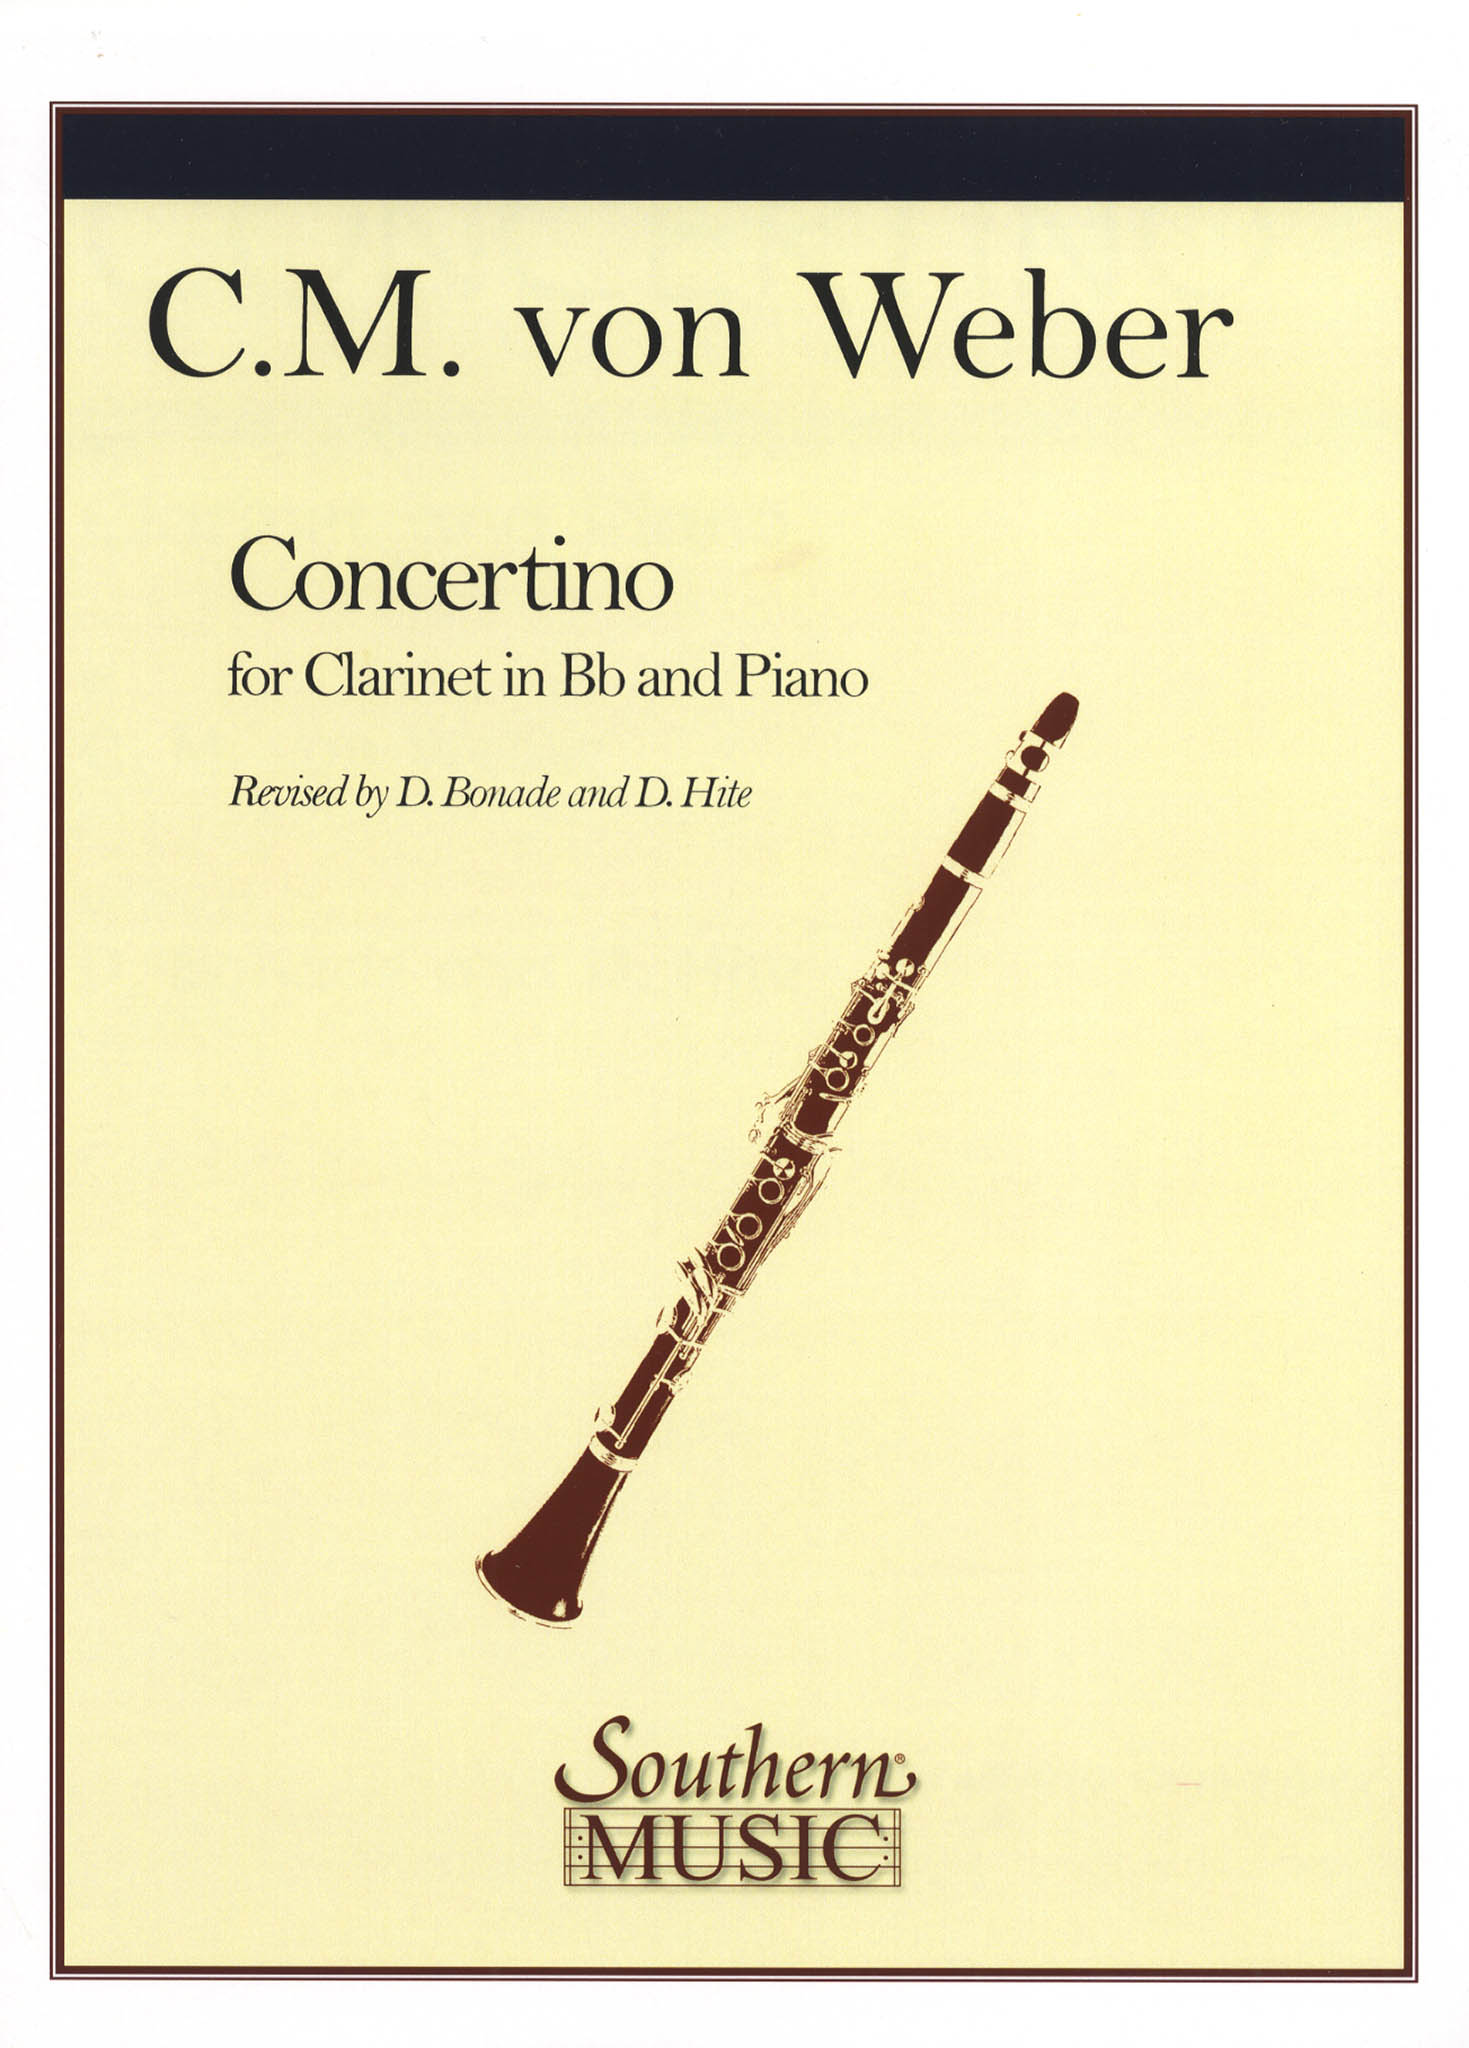 Concertino in E-flat Major, Op. 26, J. 109 Cover